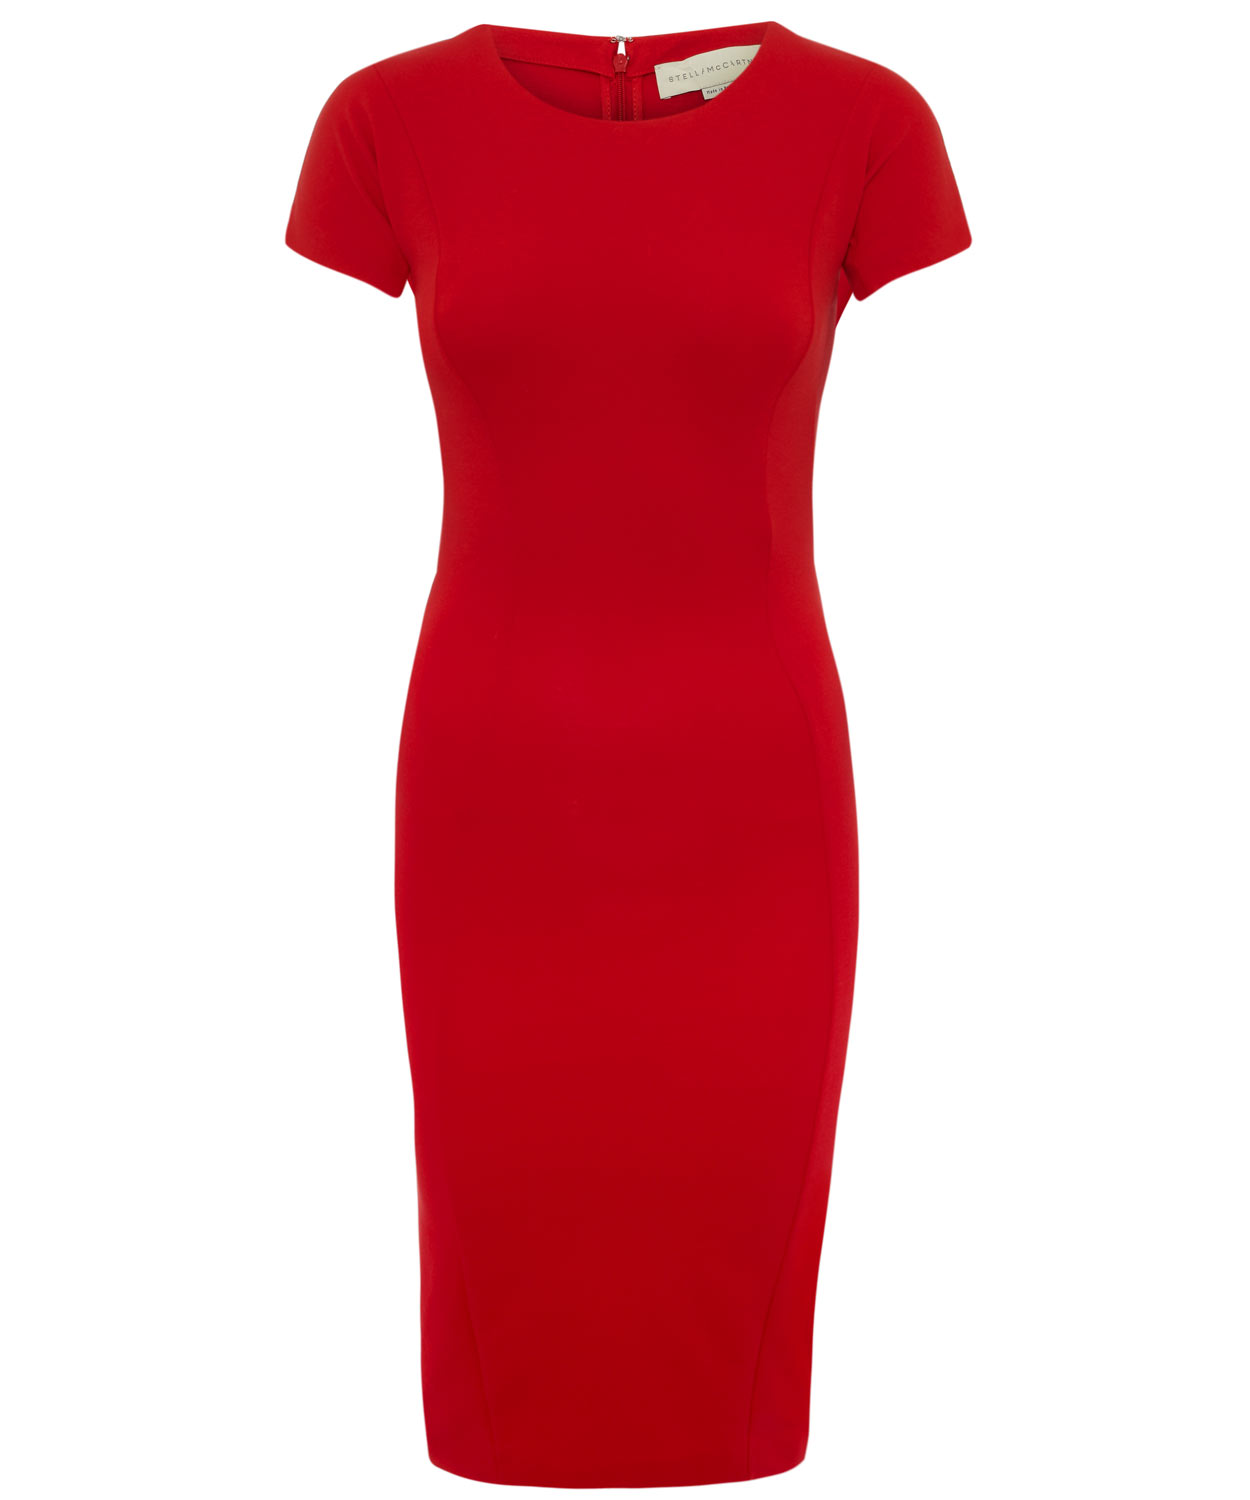 Stella mccartney Red Panelled Jersey Dress in Red | Lyst